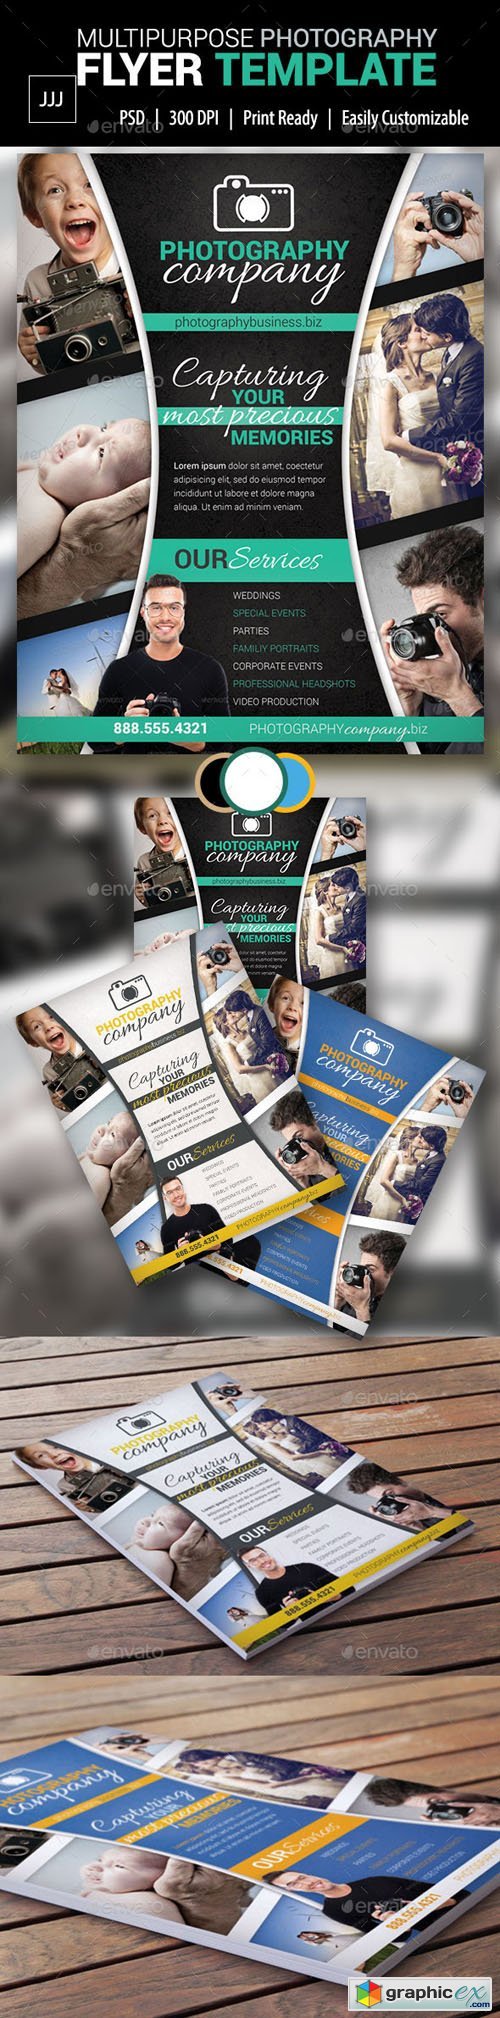 Photography Business Flyer 14